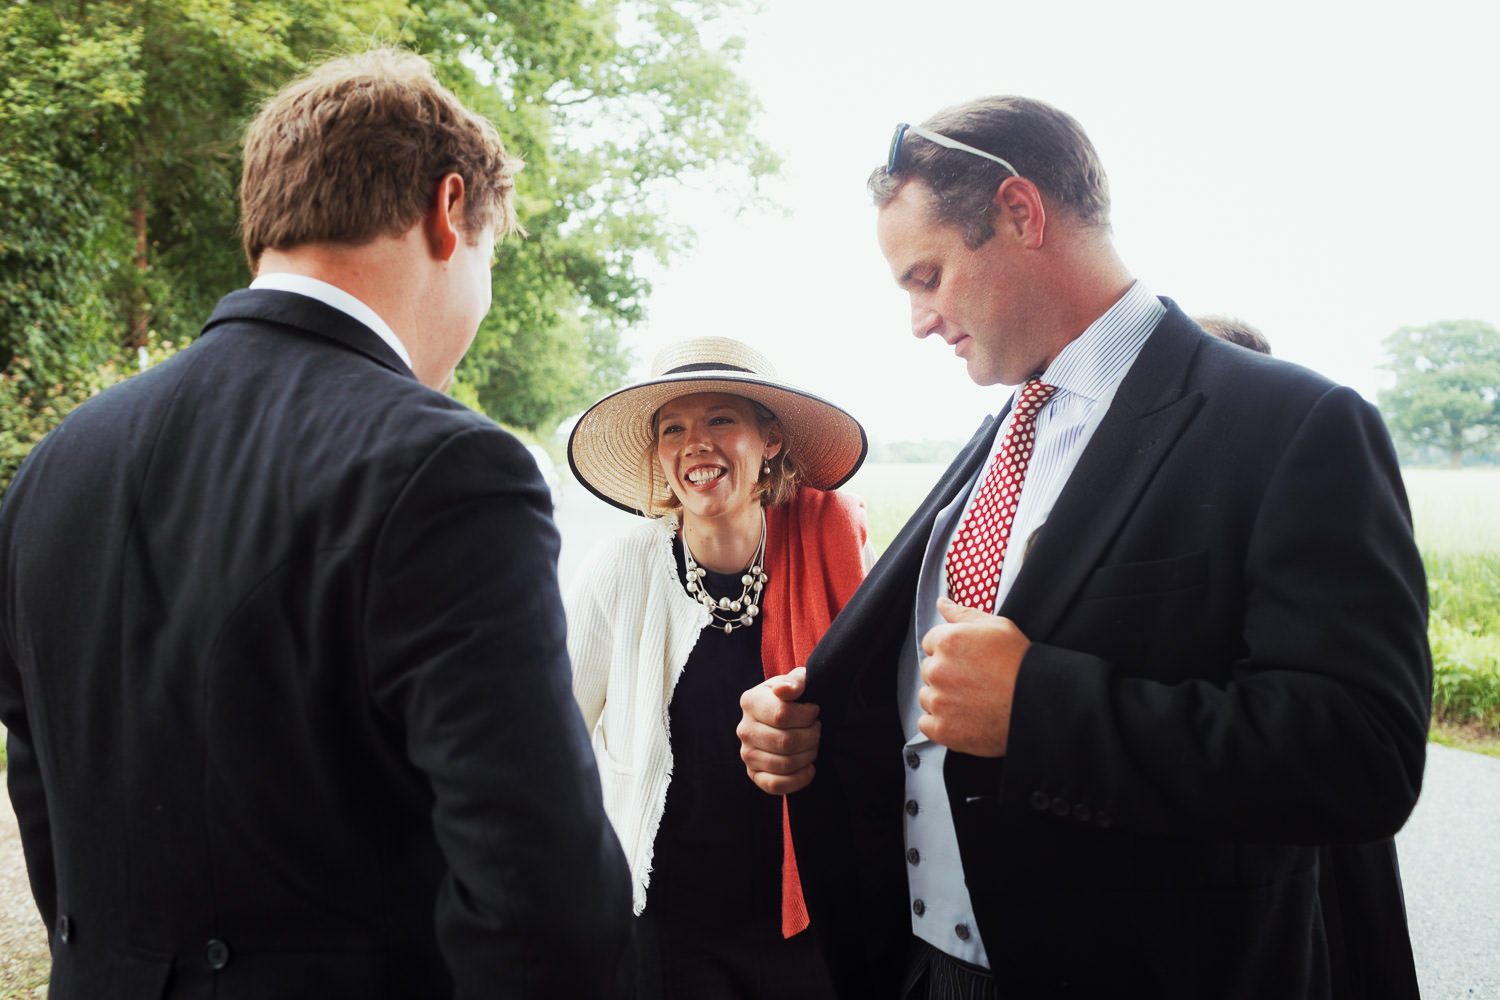 A woman in a hat arriving at a wedding.